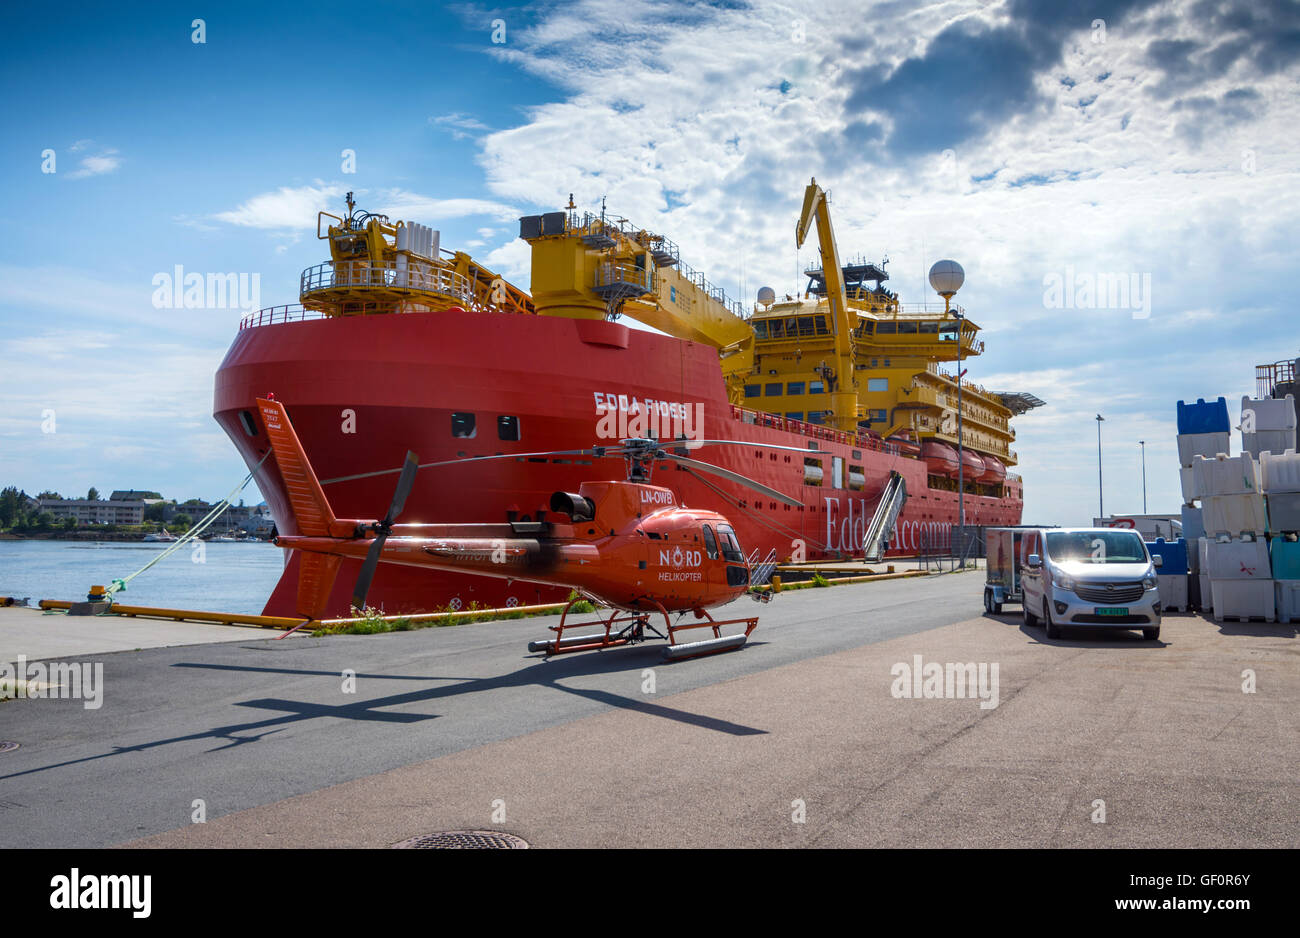 Edda Fides flotel, Accommodation ship for the oil industry, big red ship with red Nord helicopter Stock Photo